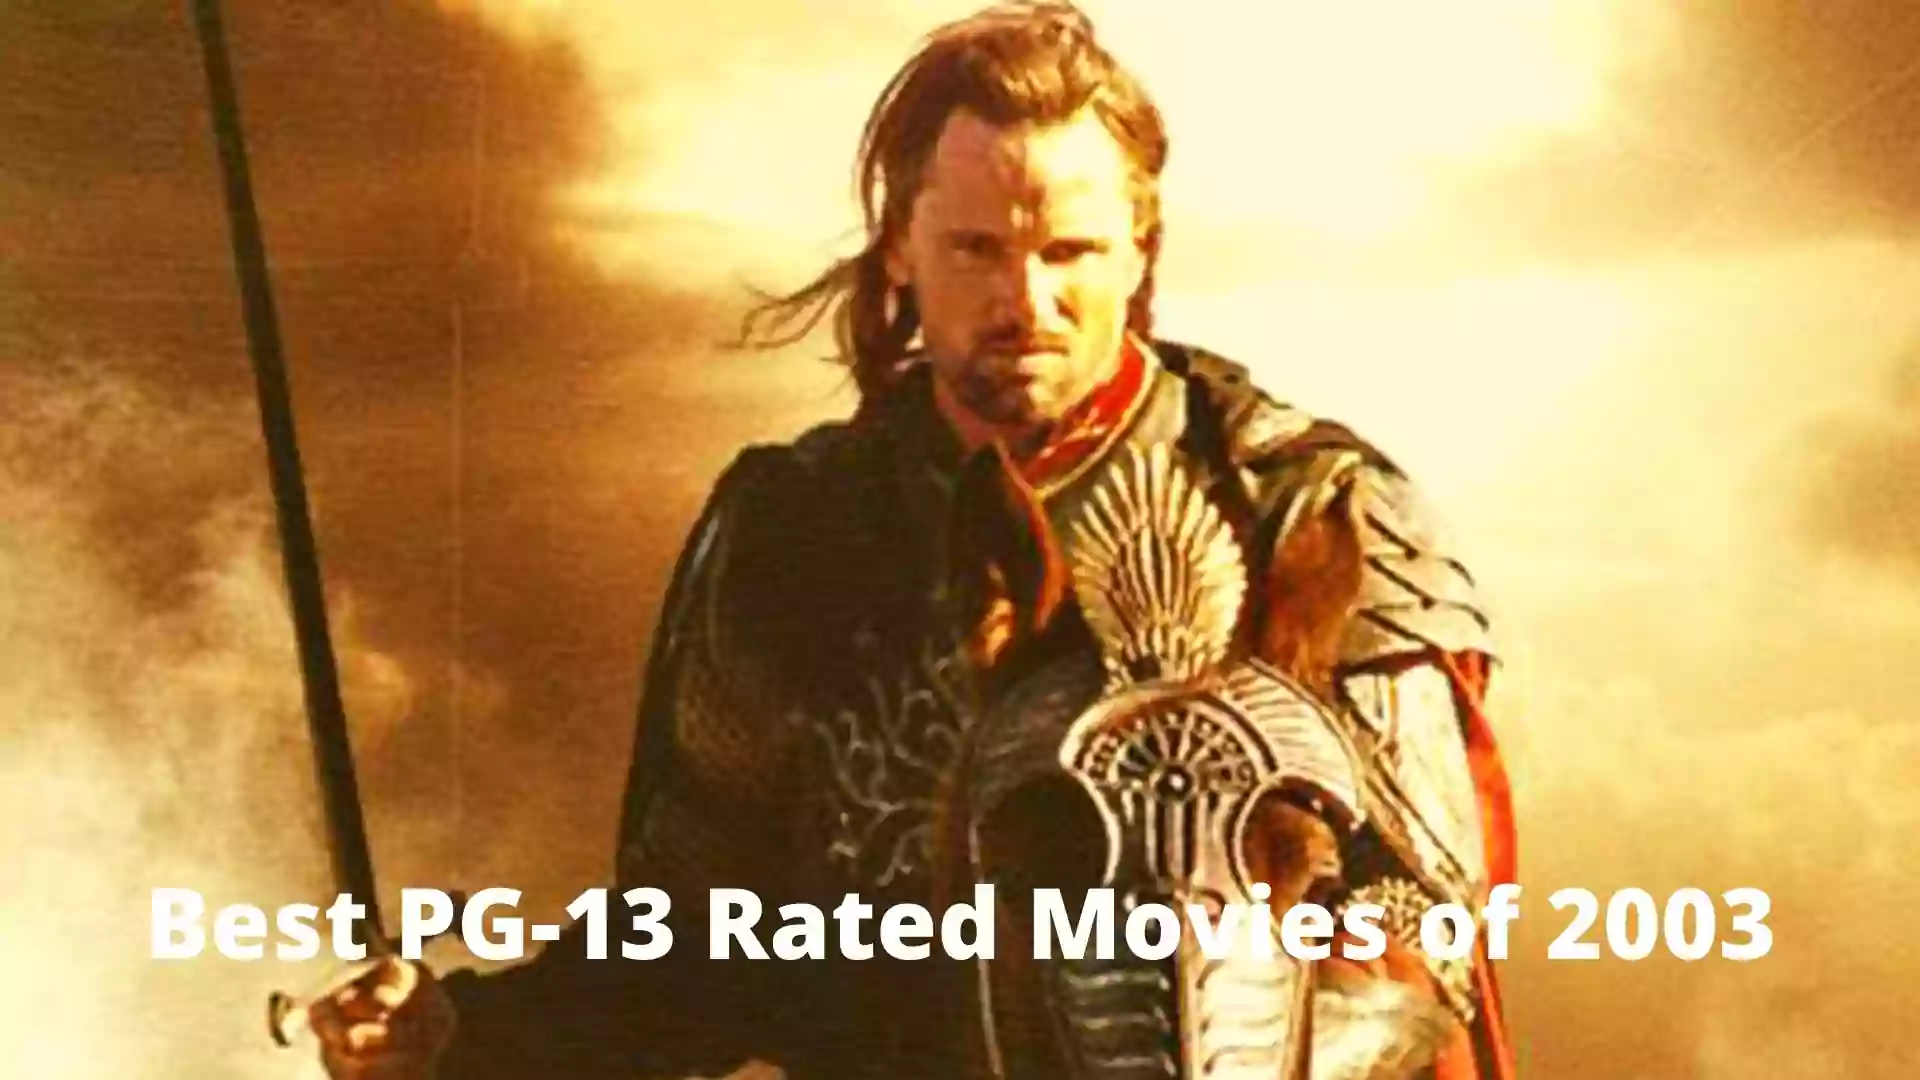 Best PG-13 Rated Movies of 2003